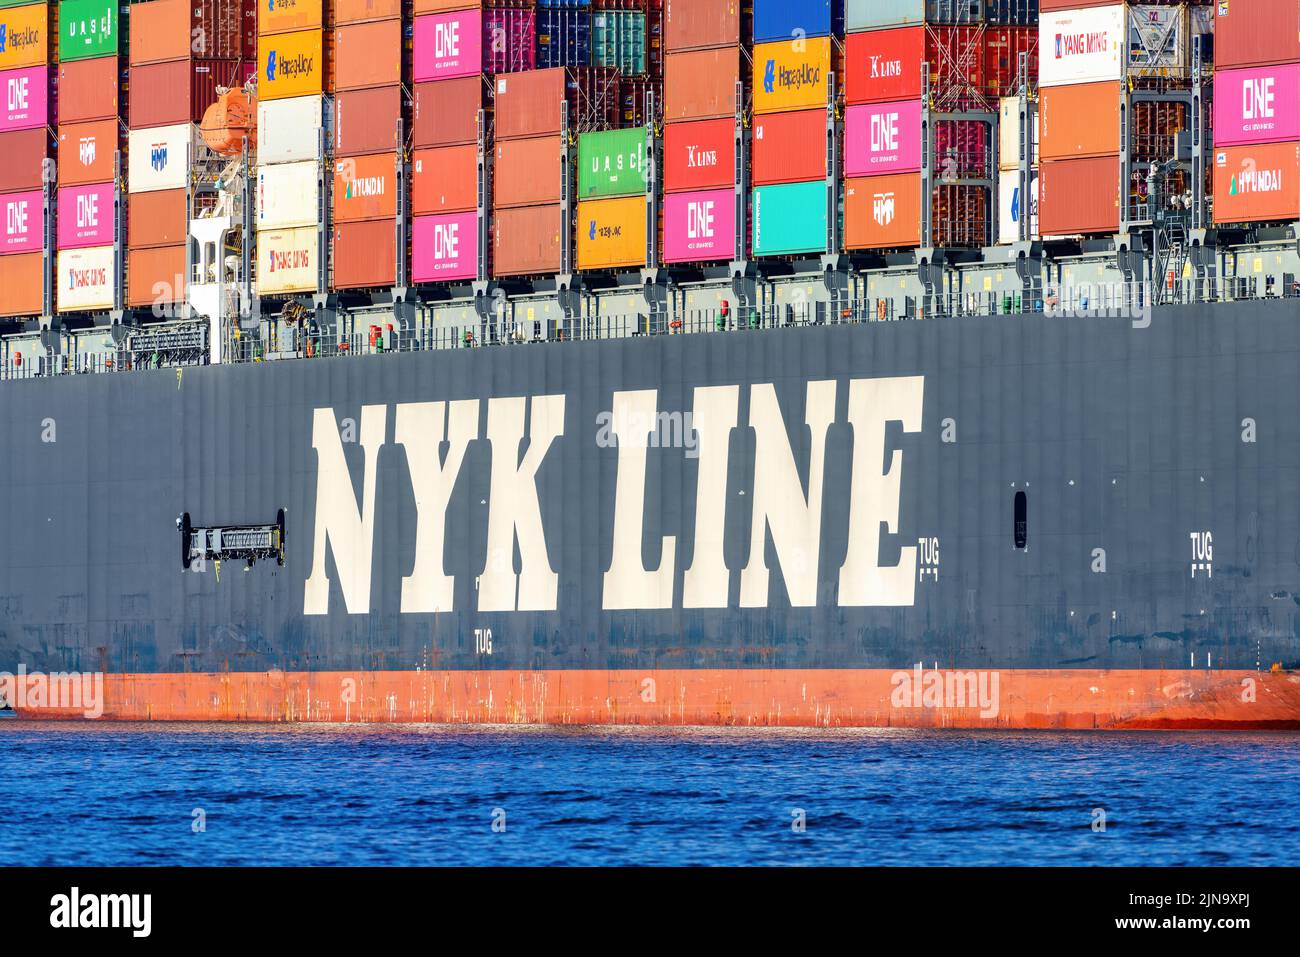 The NYK Line logo on the container carrier NYK Owl - November 2020. Stock Photo